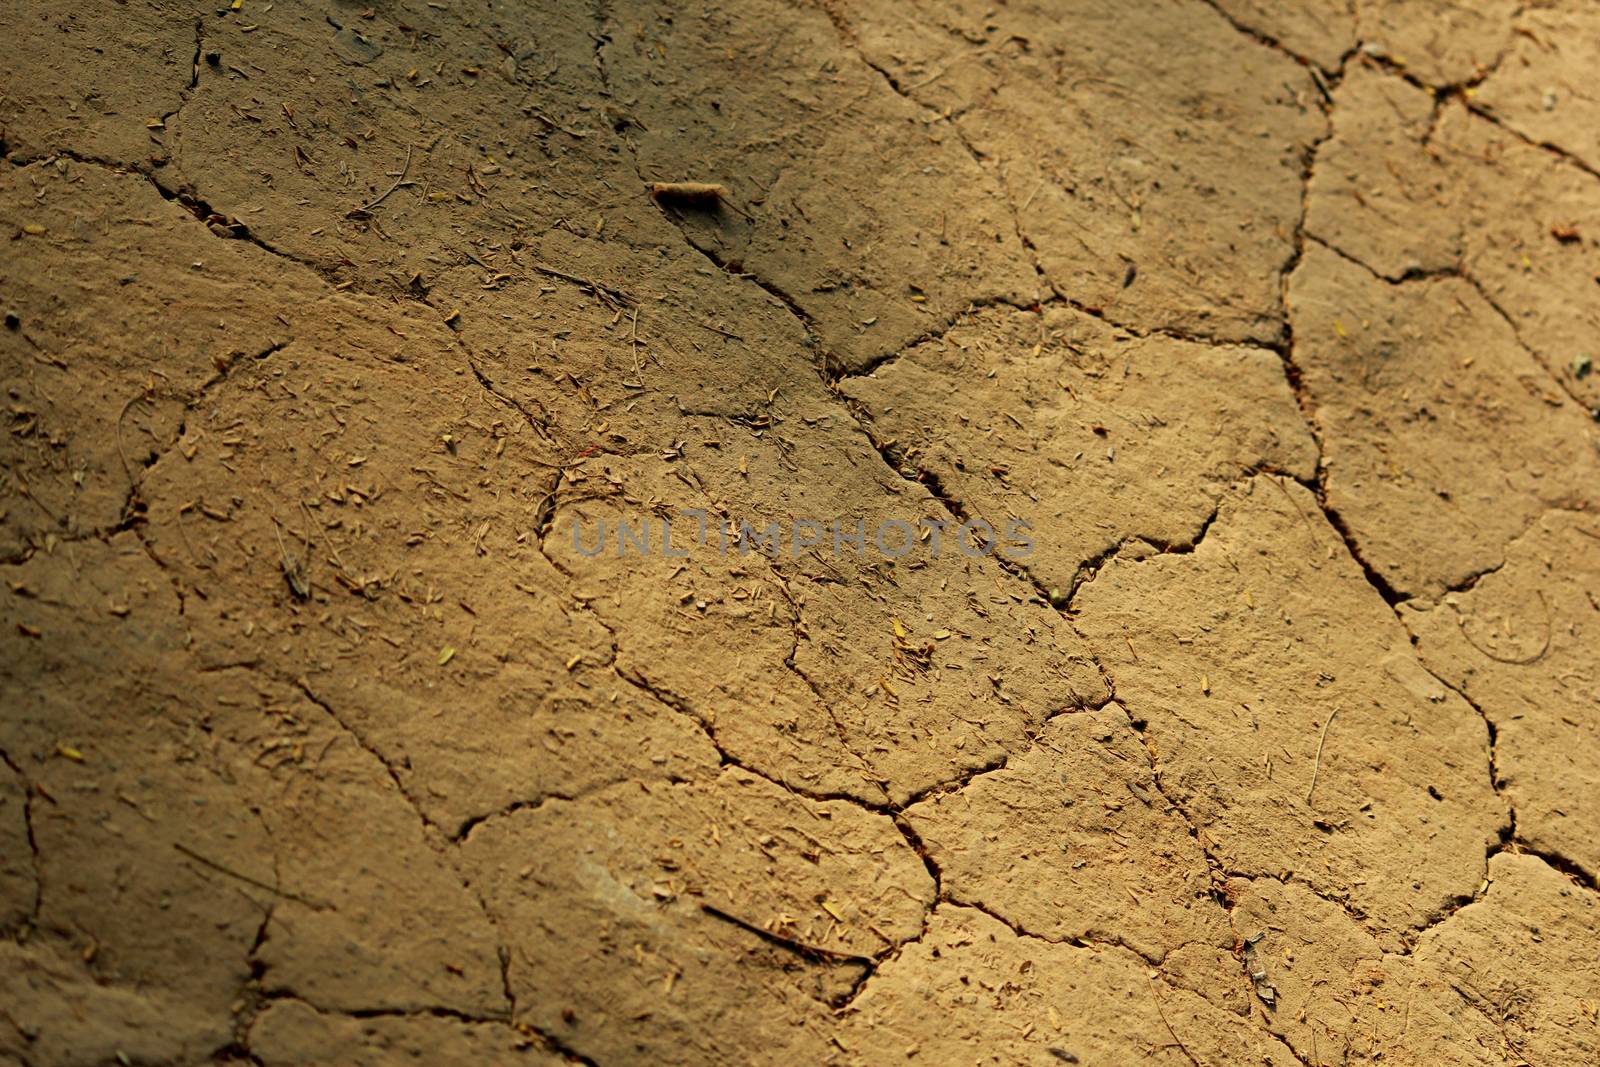 Shadow and light on a barren land-dry cracked brown earth by shawlinmohd